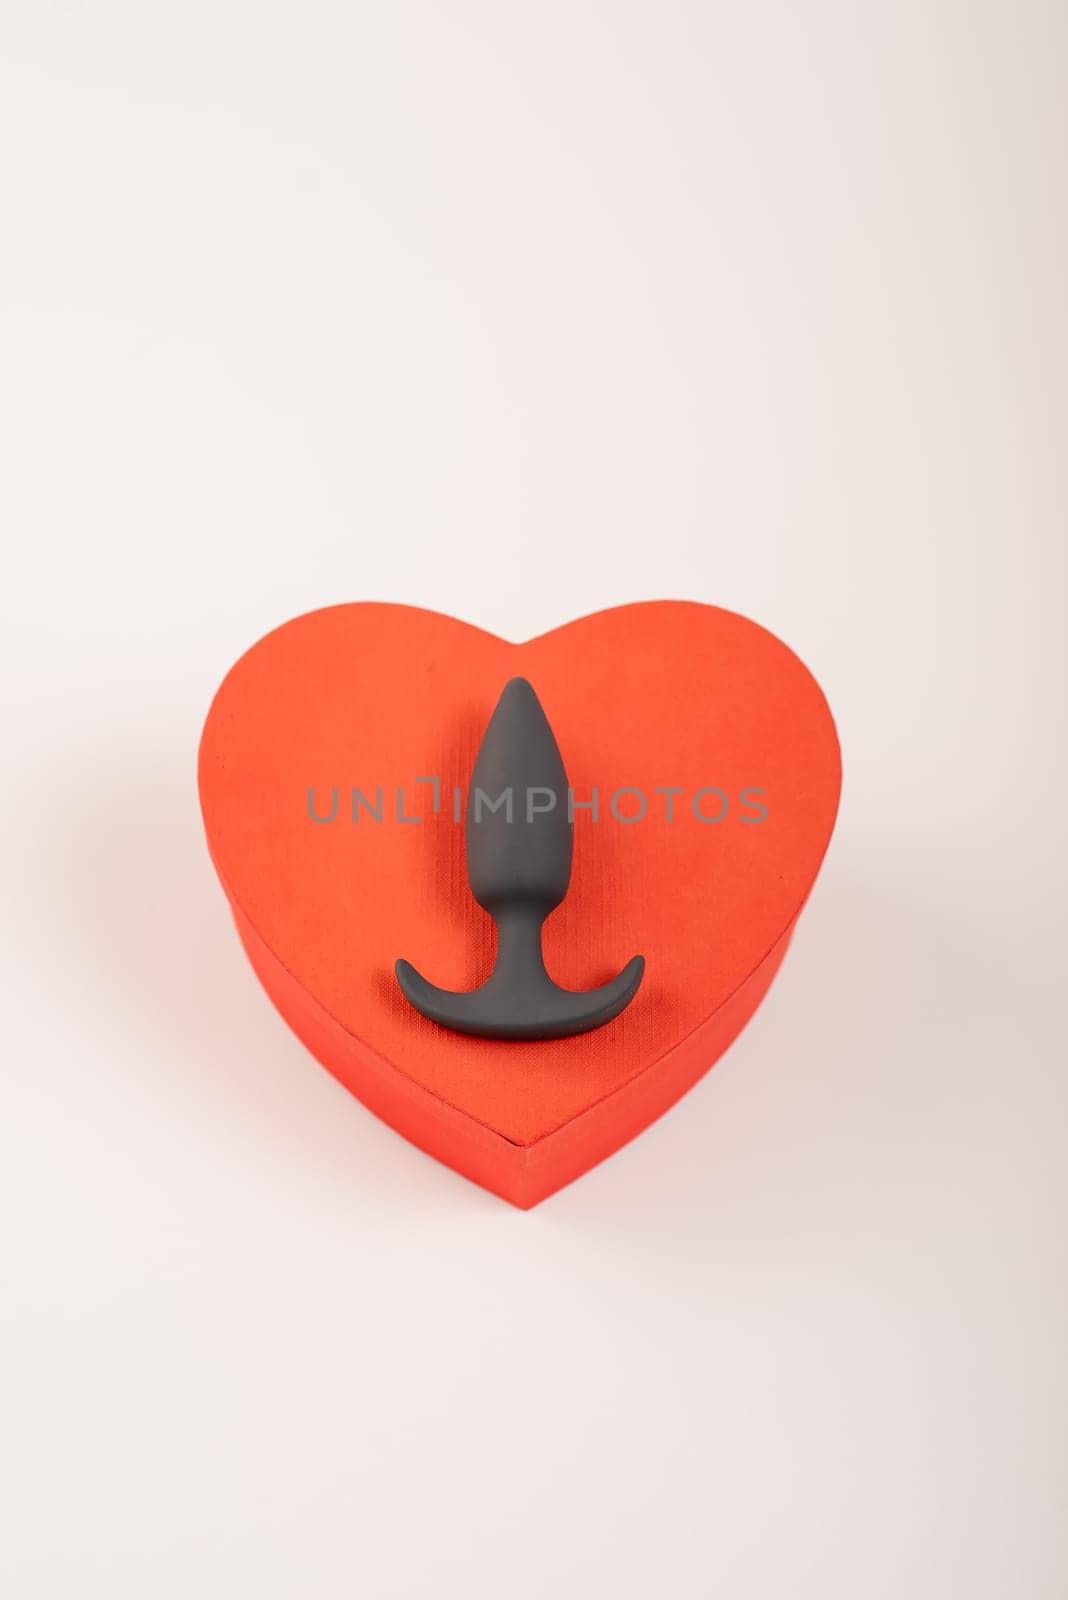 Heart-shaped box and butt plug on a white background. Love on February 14. by mrwed54